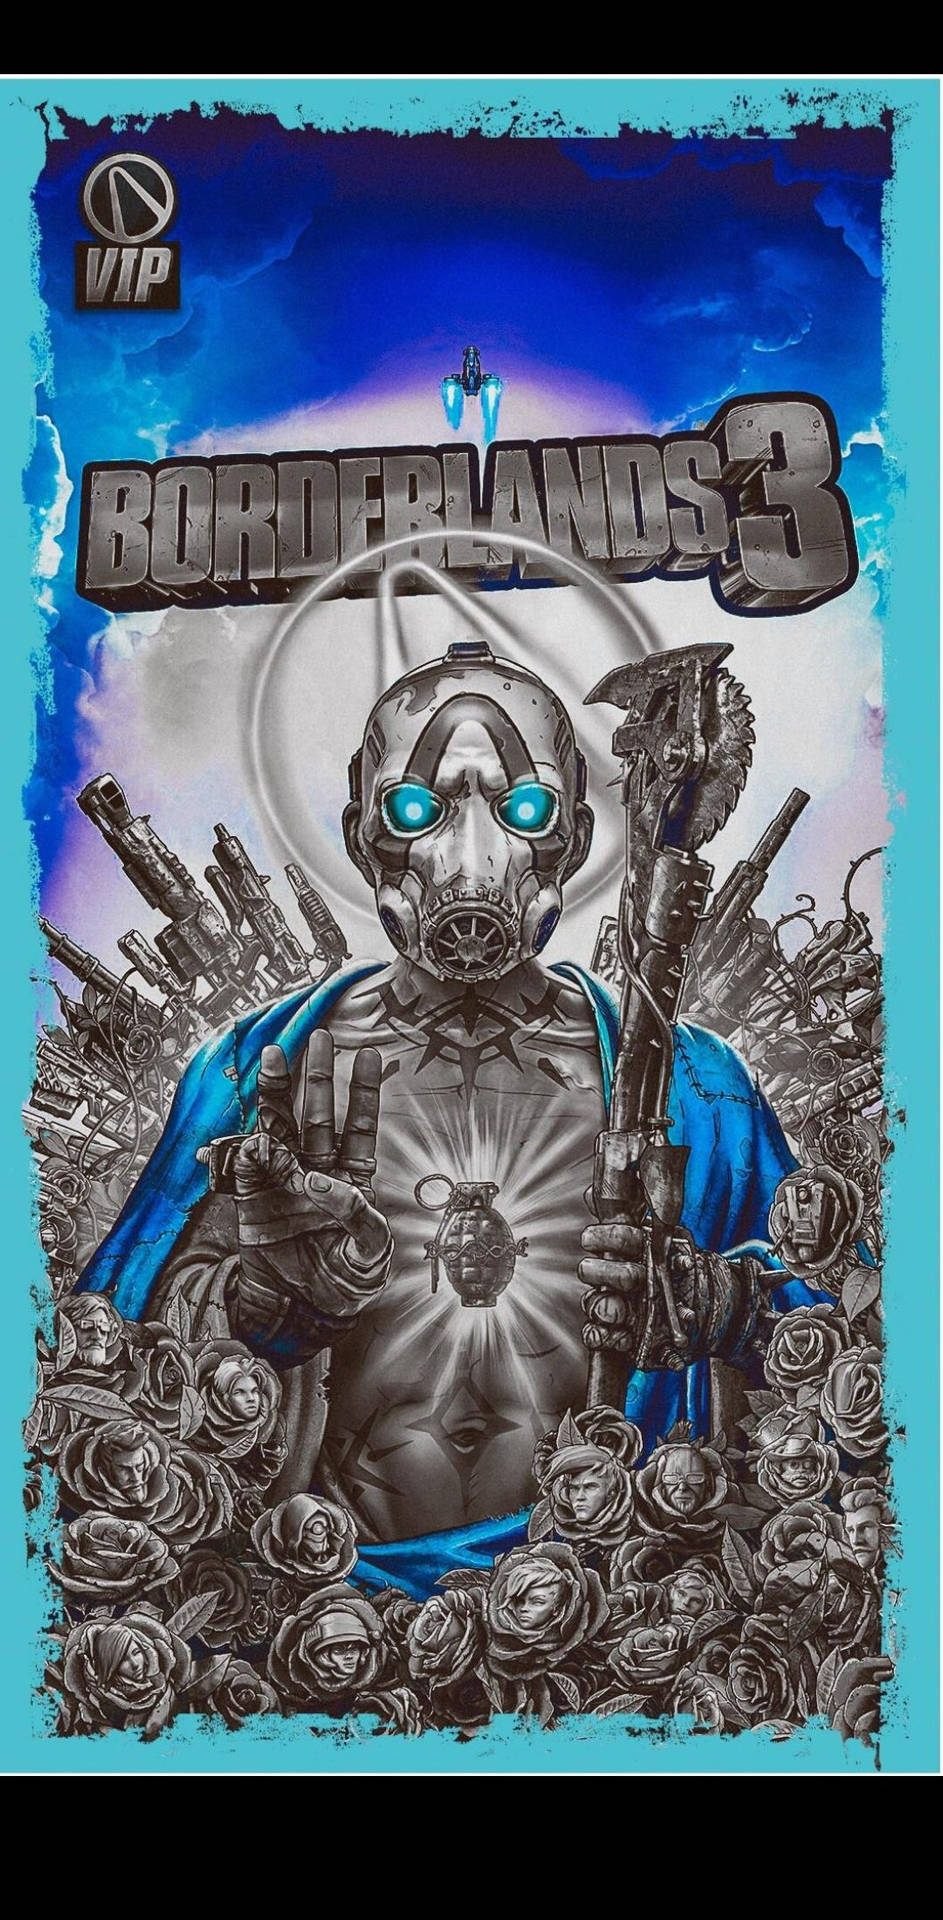 Explore The Imaginative World Of Borderlands Like Never Before With The New Borderlands Iphone Background